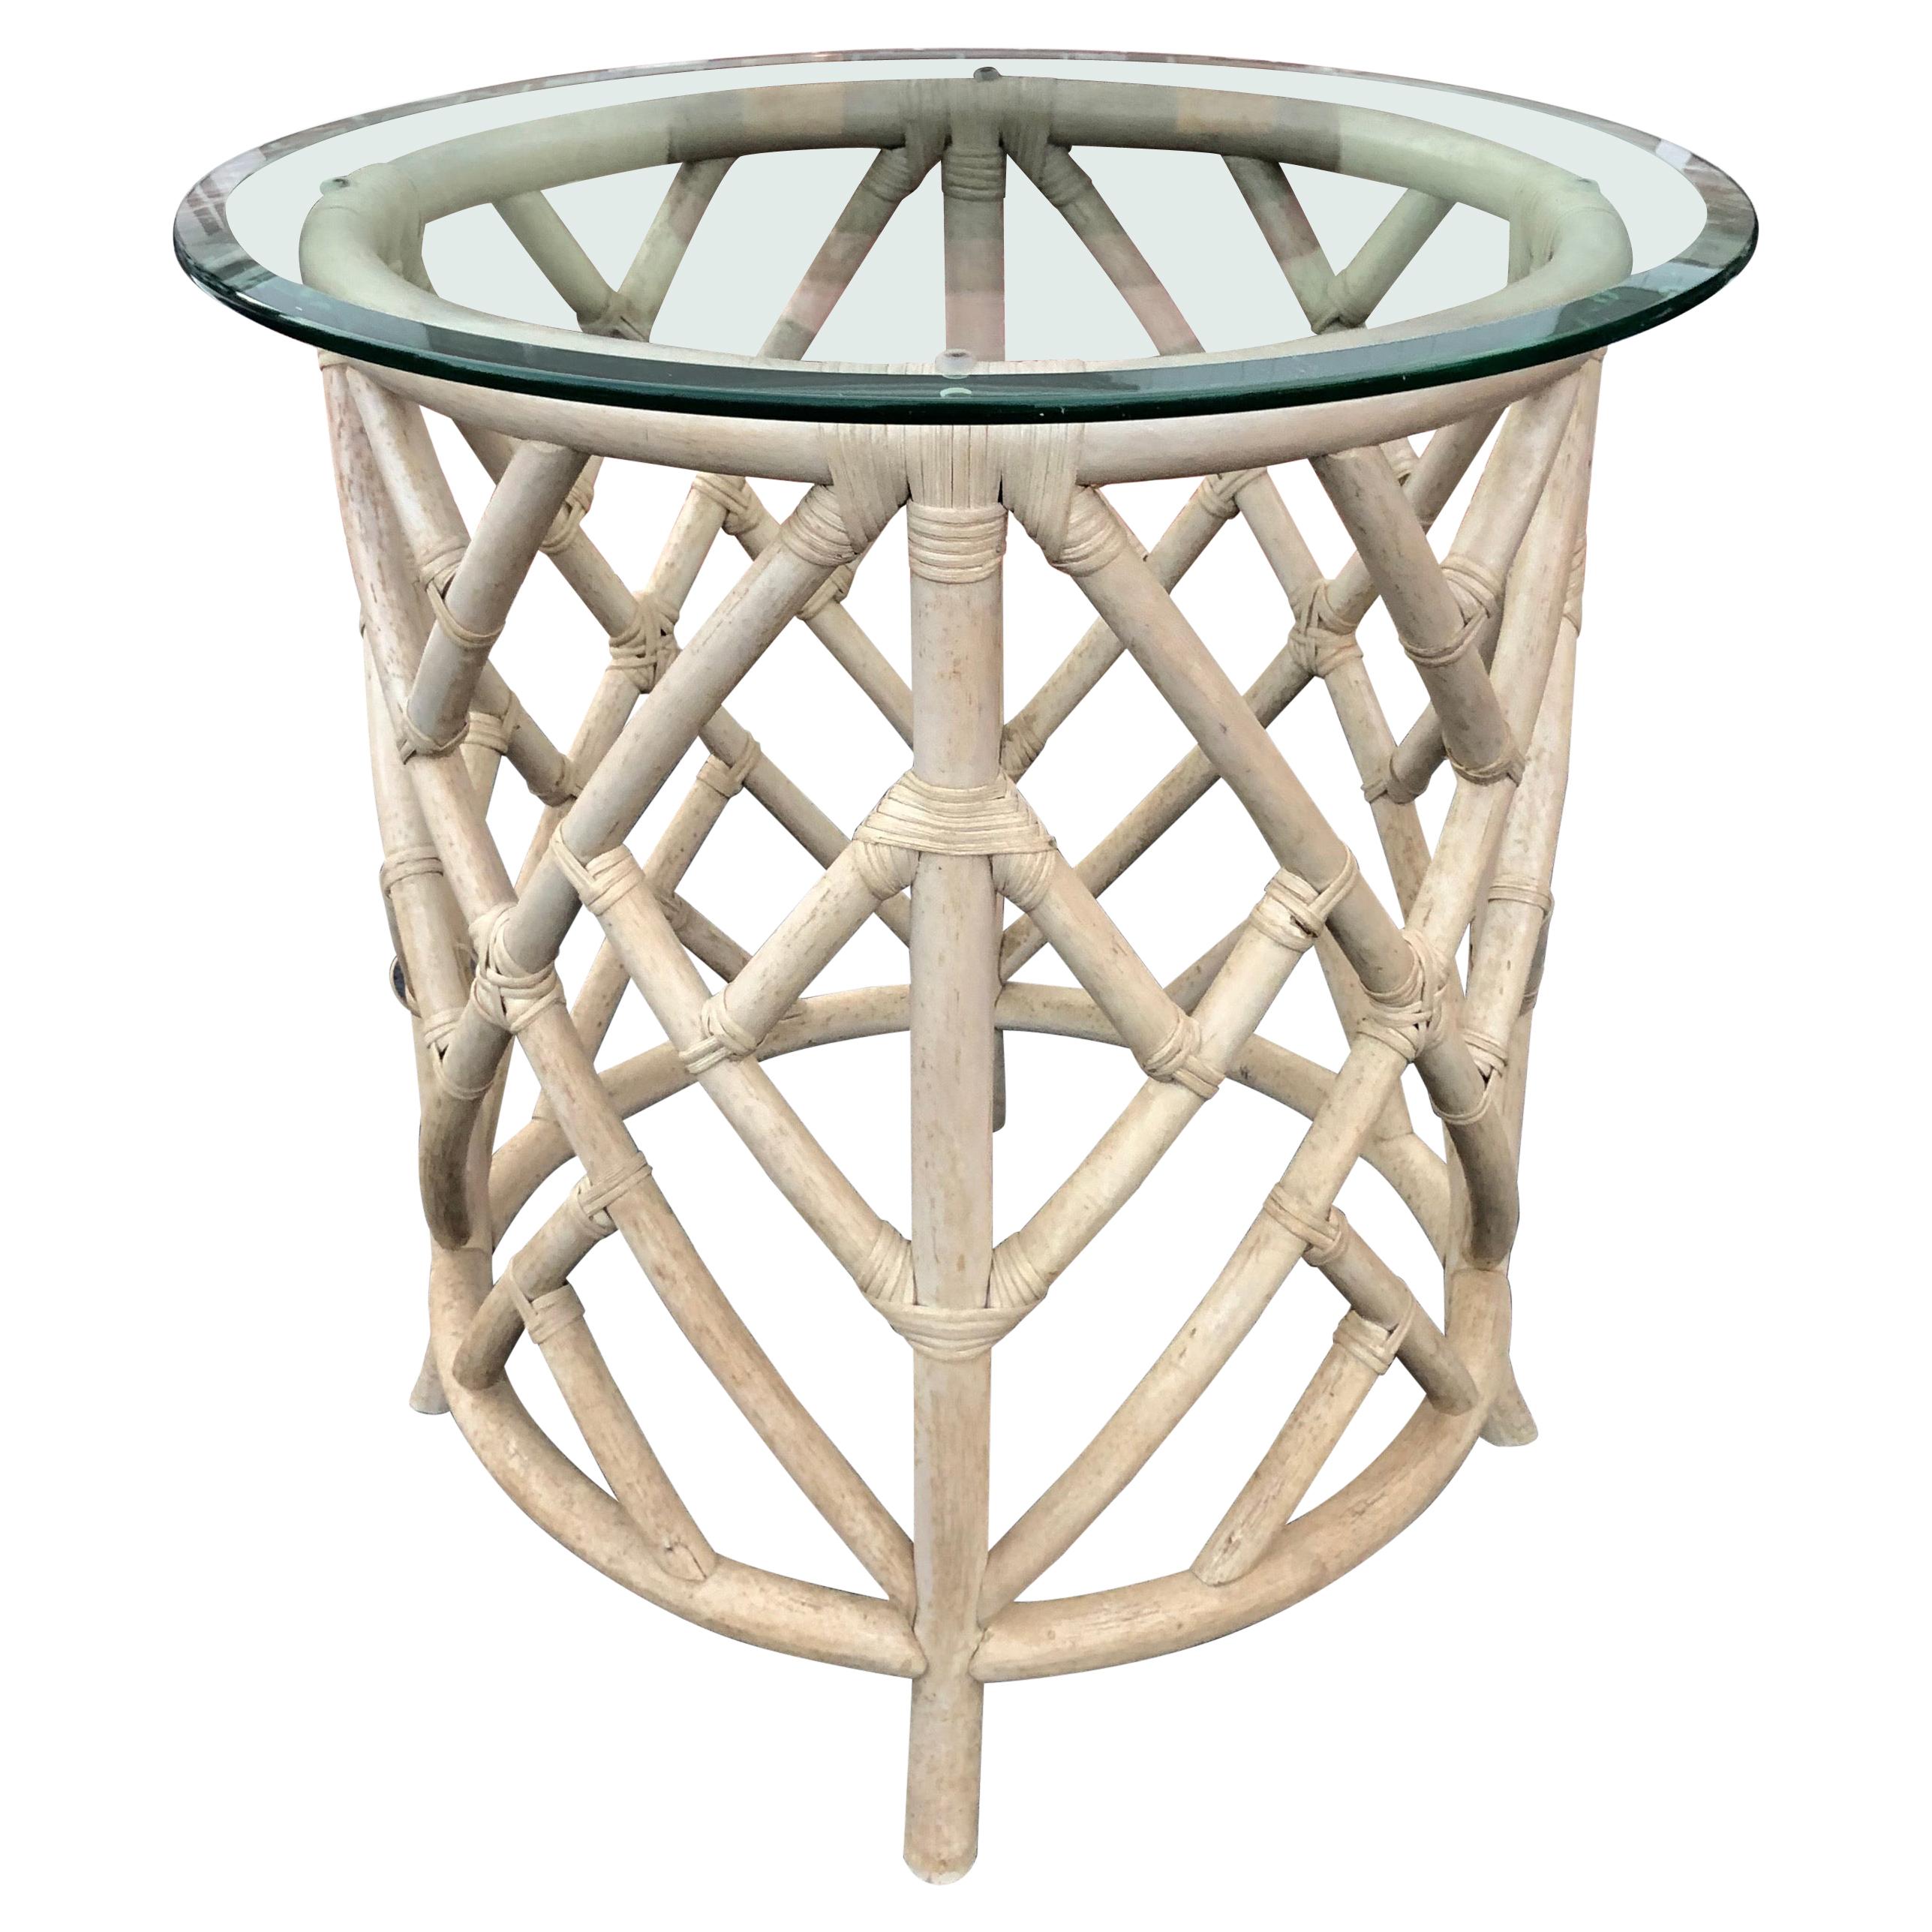 Boho Chic Chinoiserie Round Rattan Dining Table Base